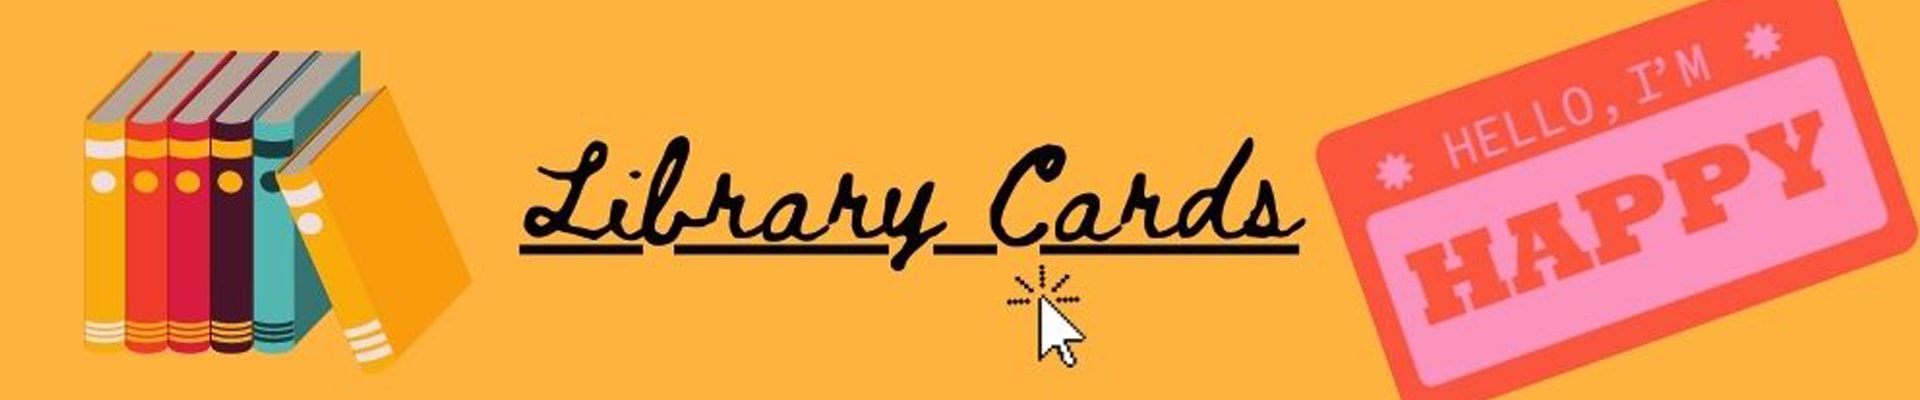 library cards banner